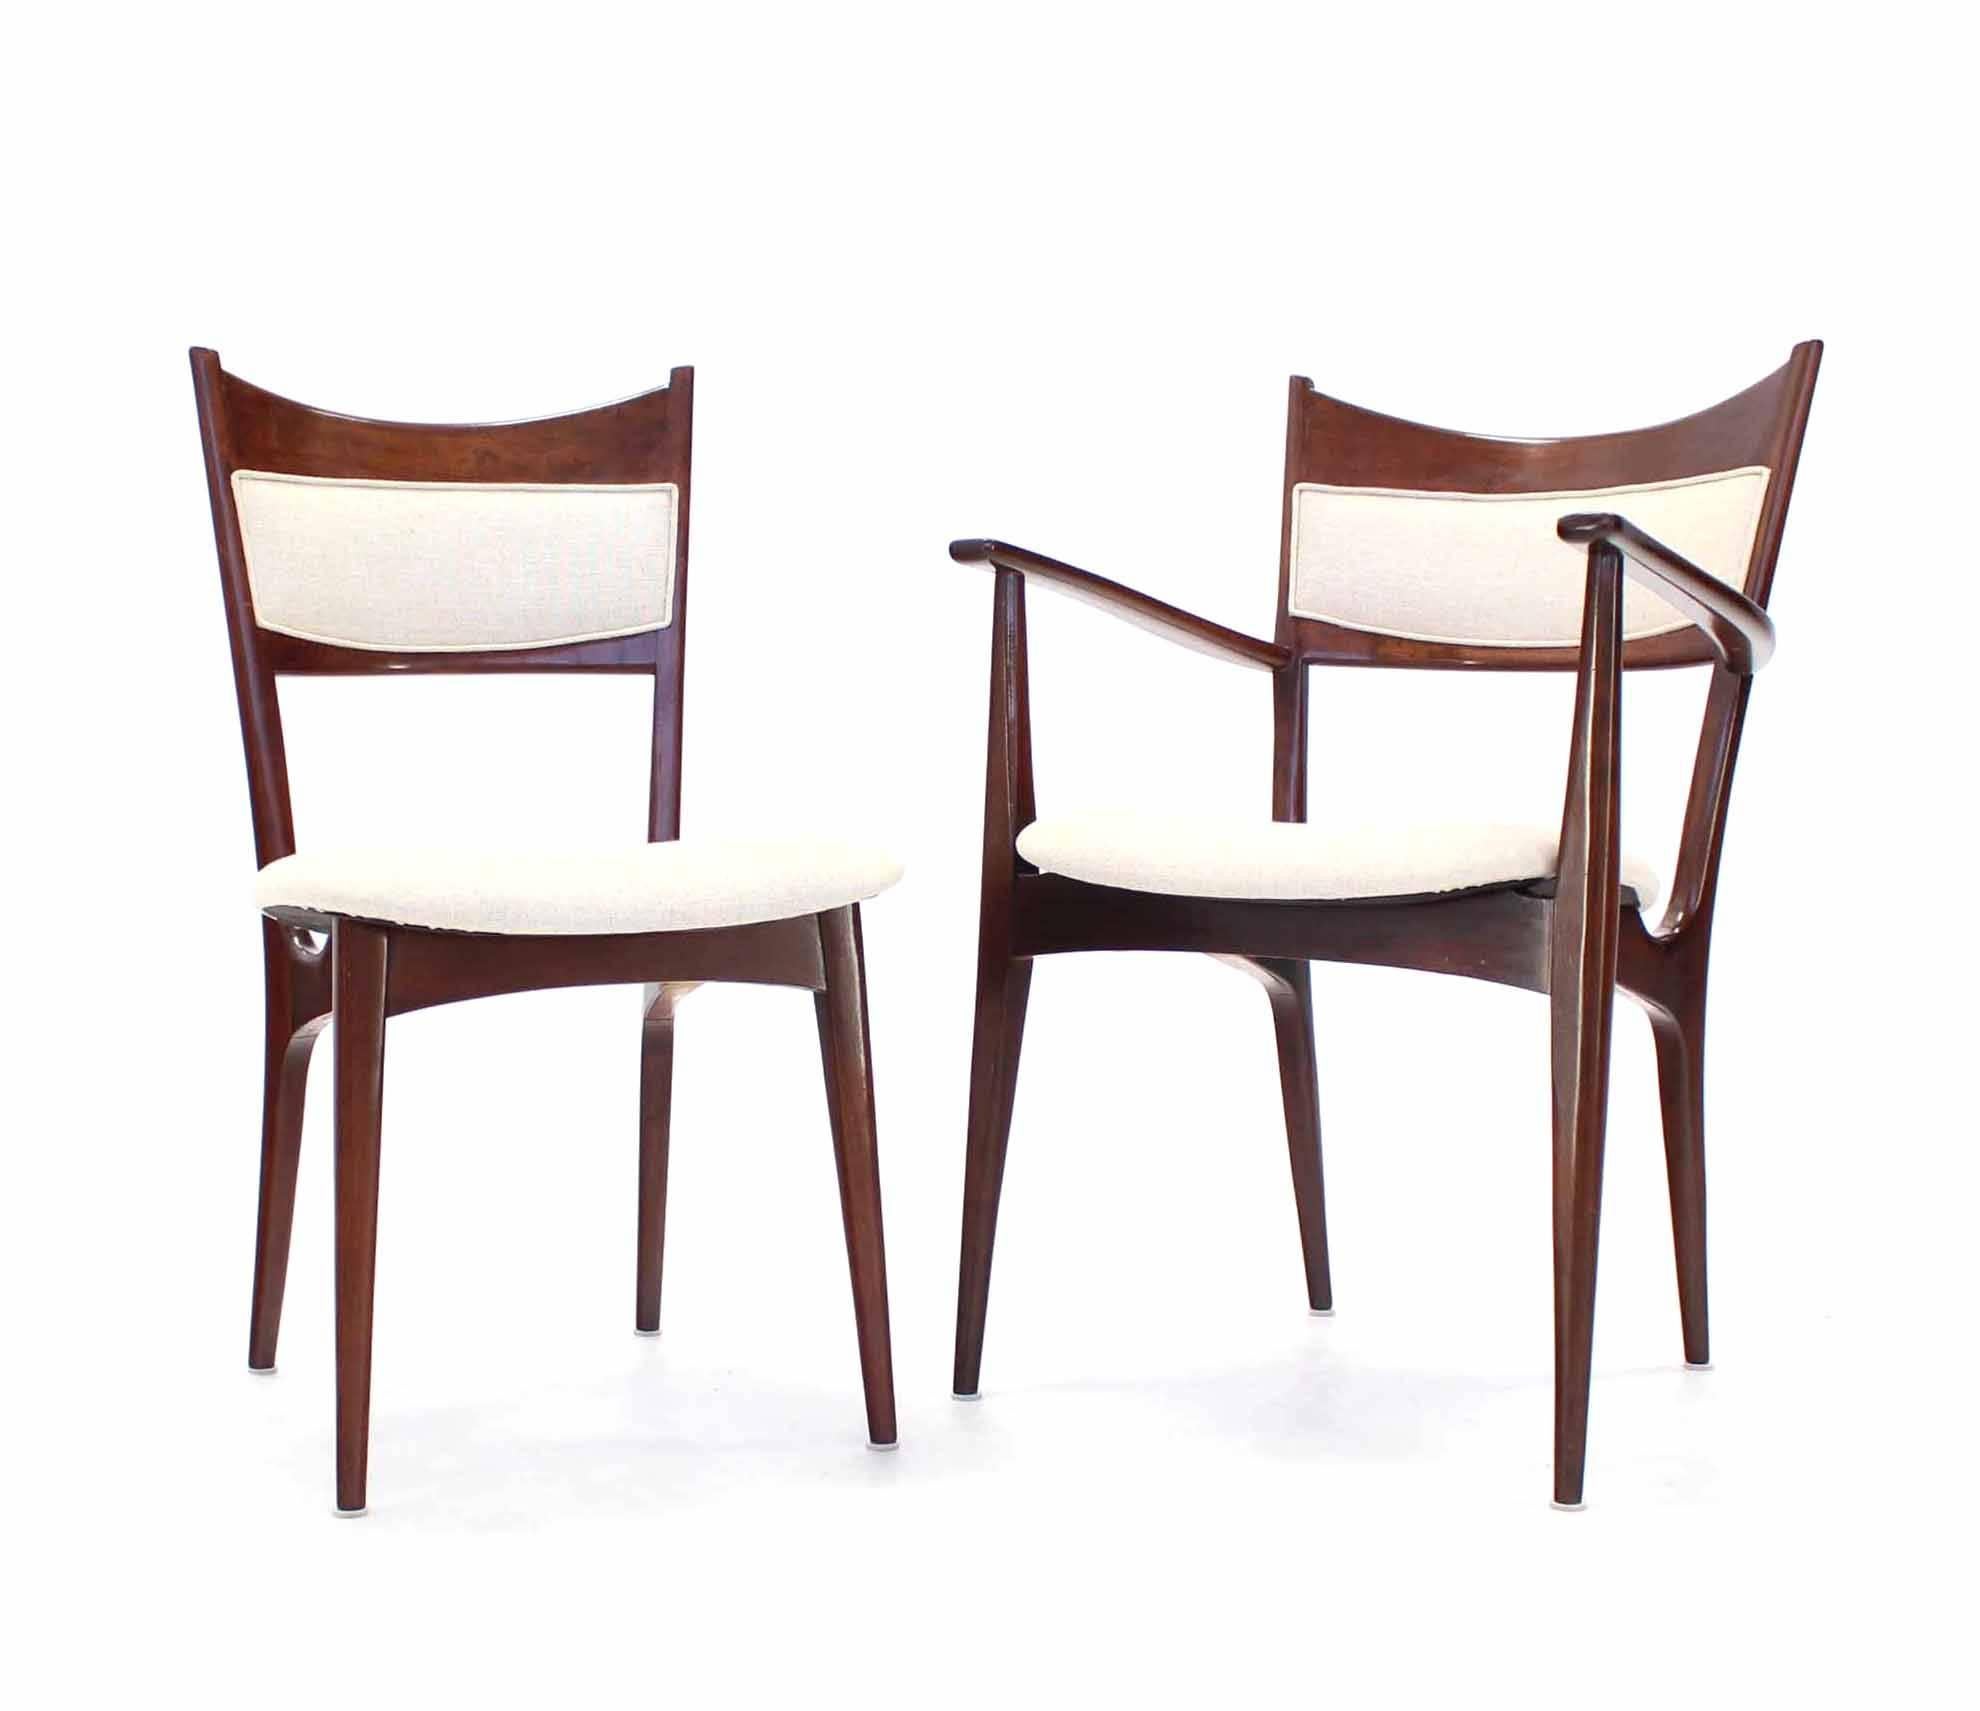 Set of Six Italian Modern Dining Chairs with New Upholstery 1